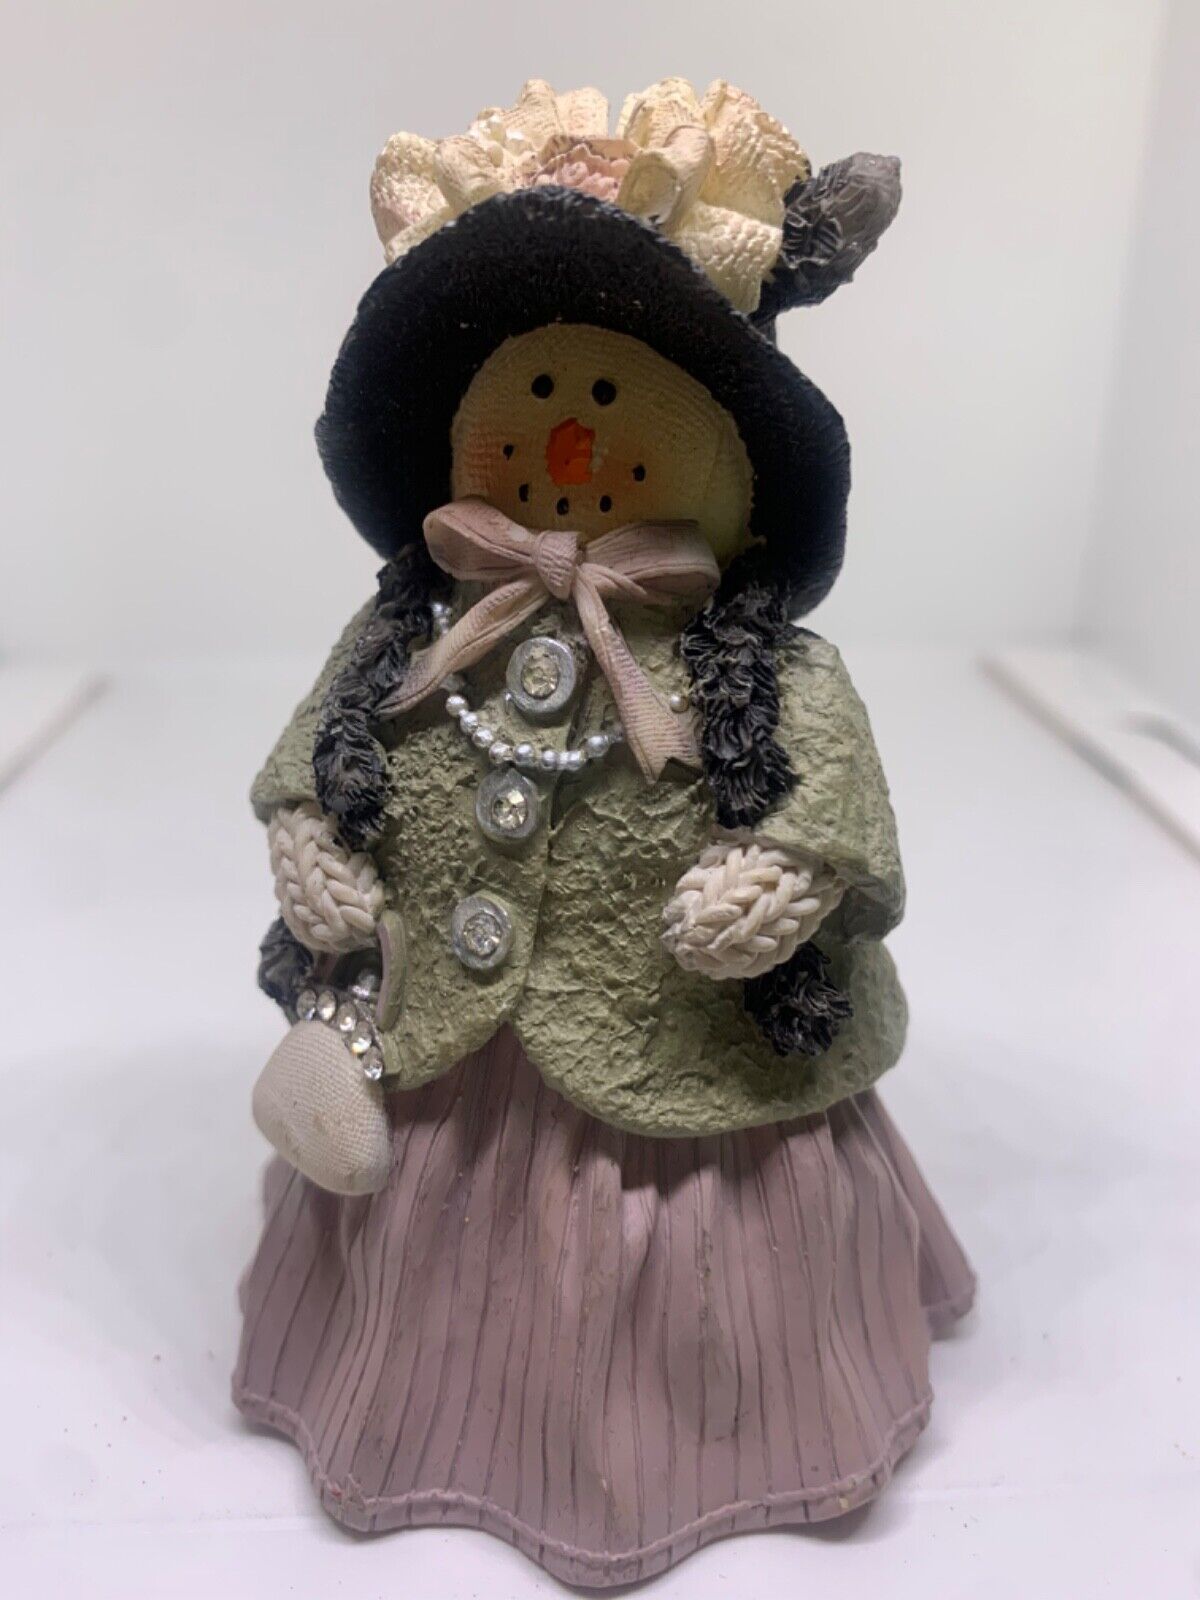 miss heather\'s plum pudding snowman by heather ruybal for artisan flair